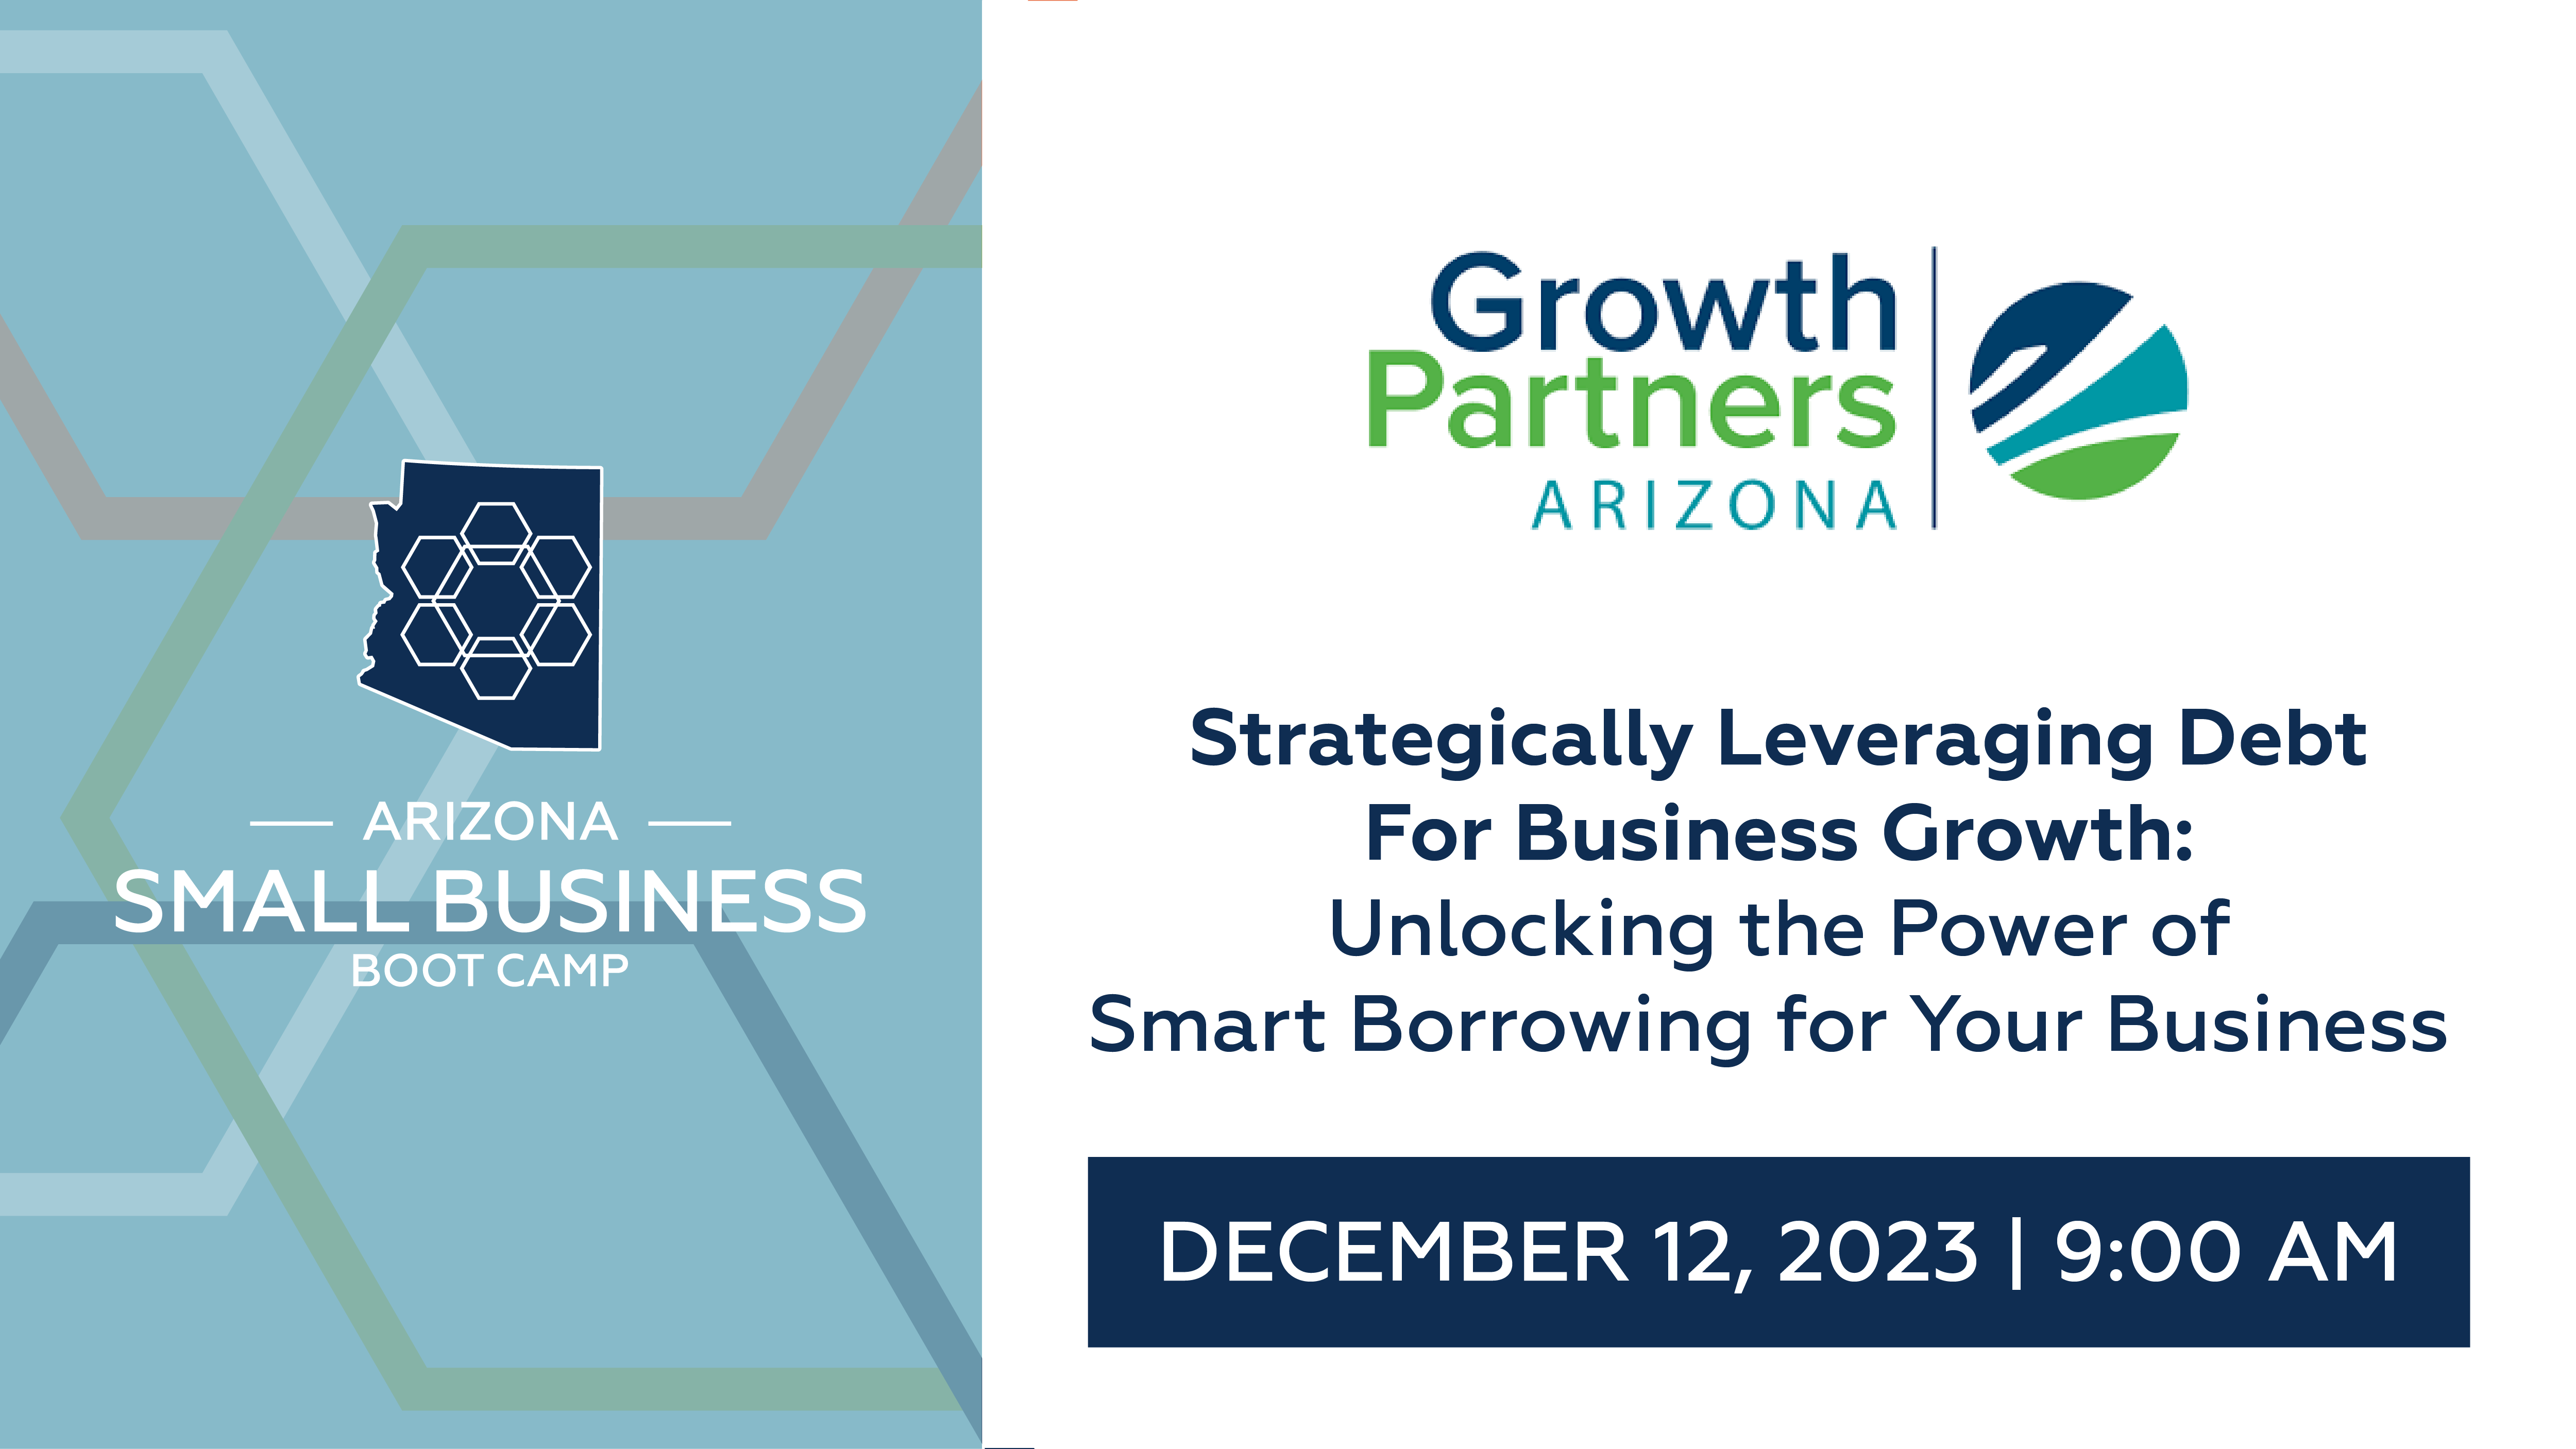 Strategically Leveraging Debt For Business Growth: Unlocking the Power of Smart Borrowing for Your Business